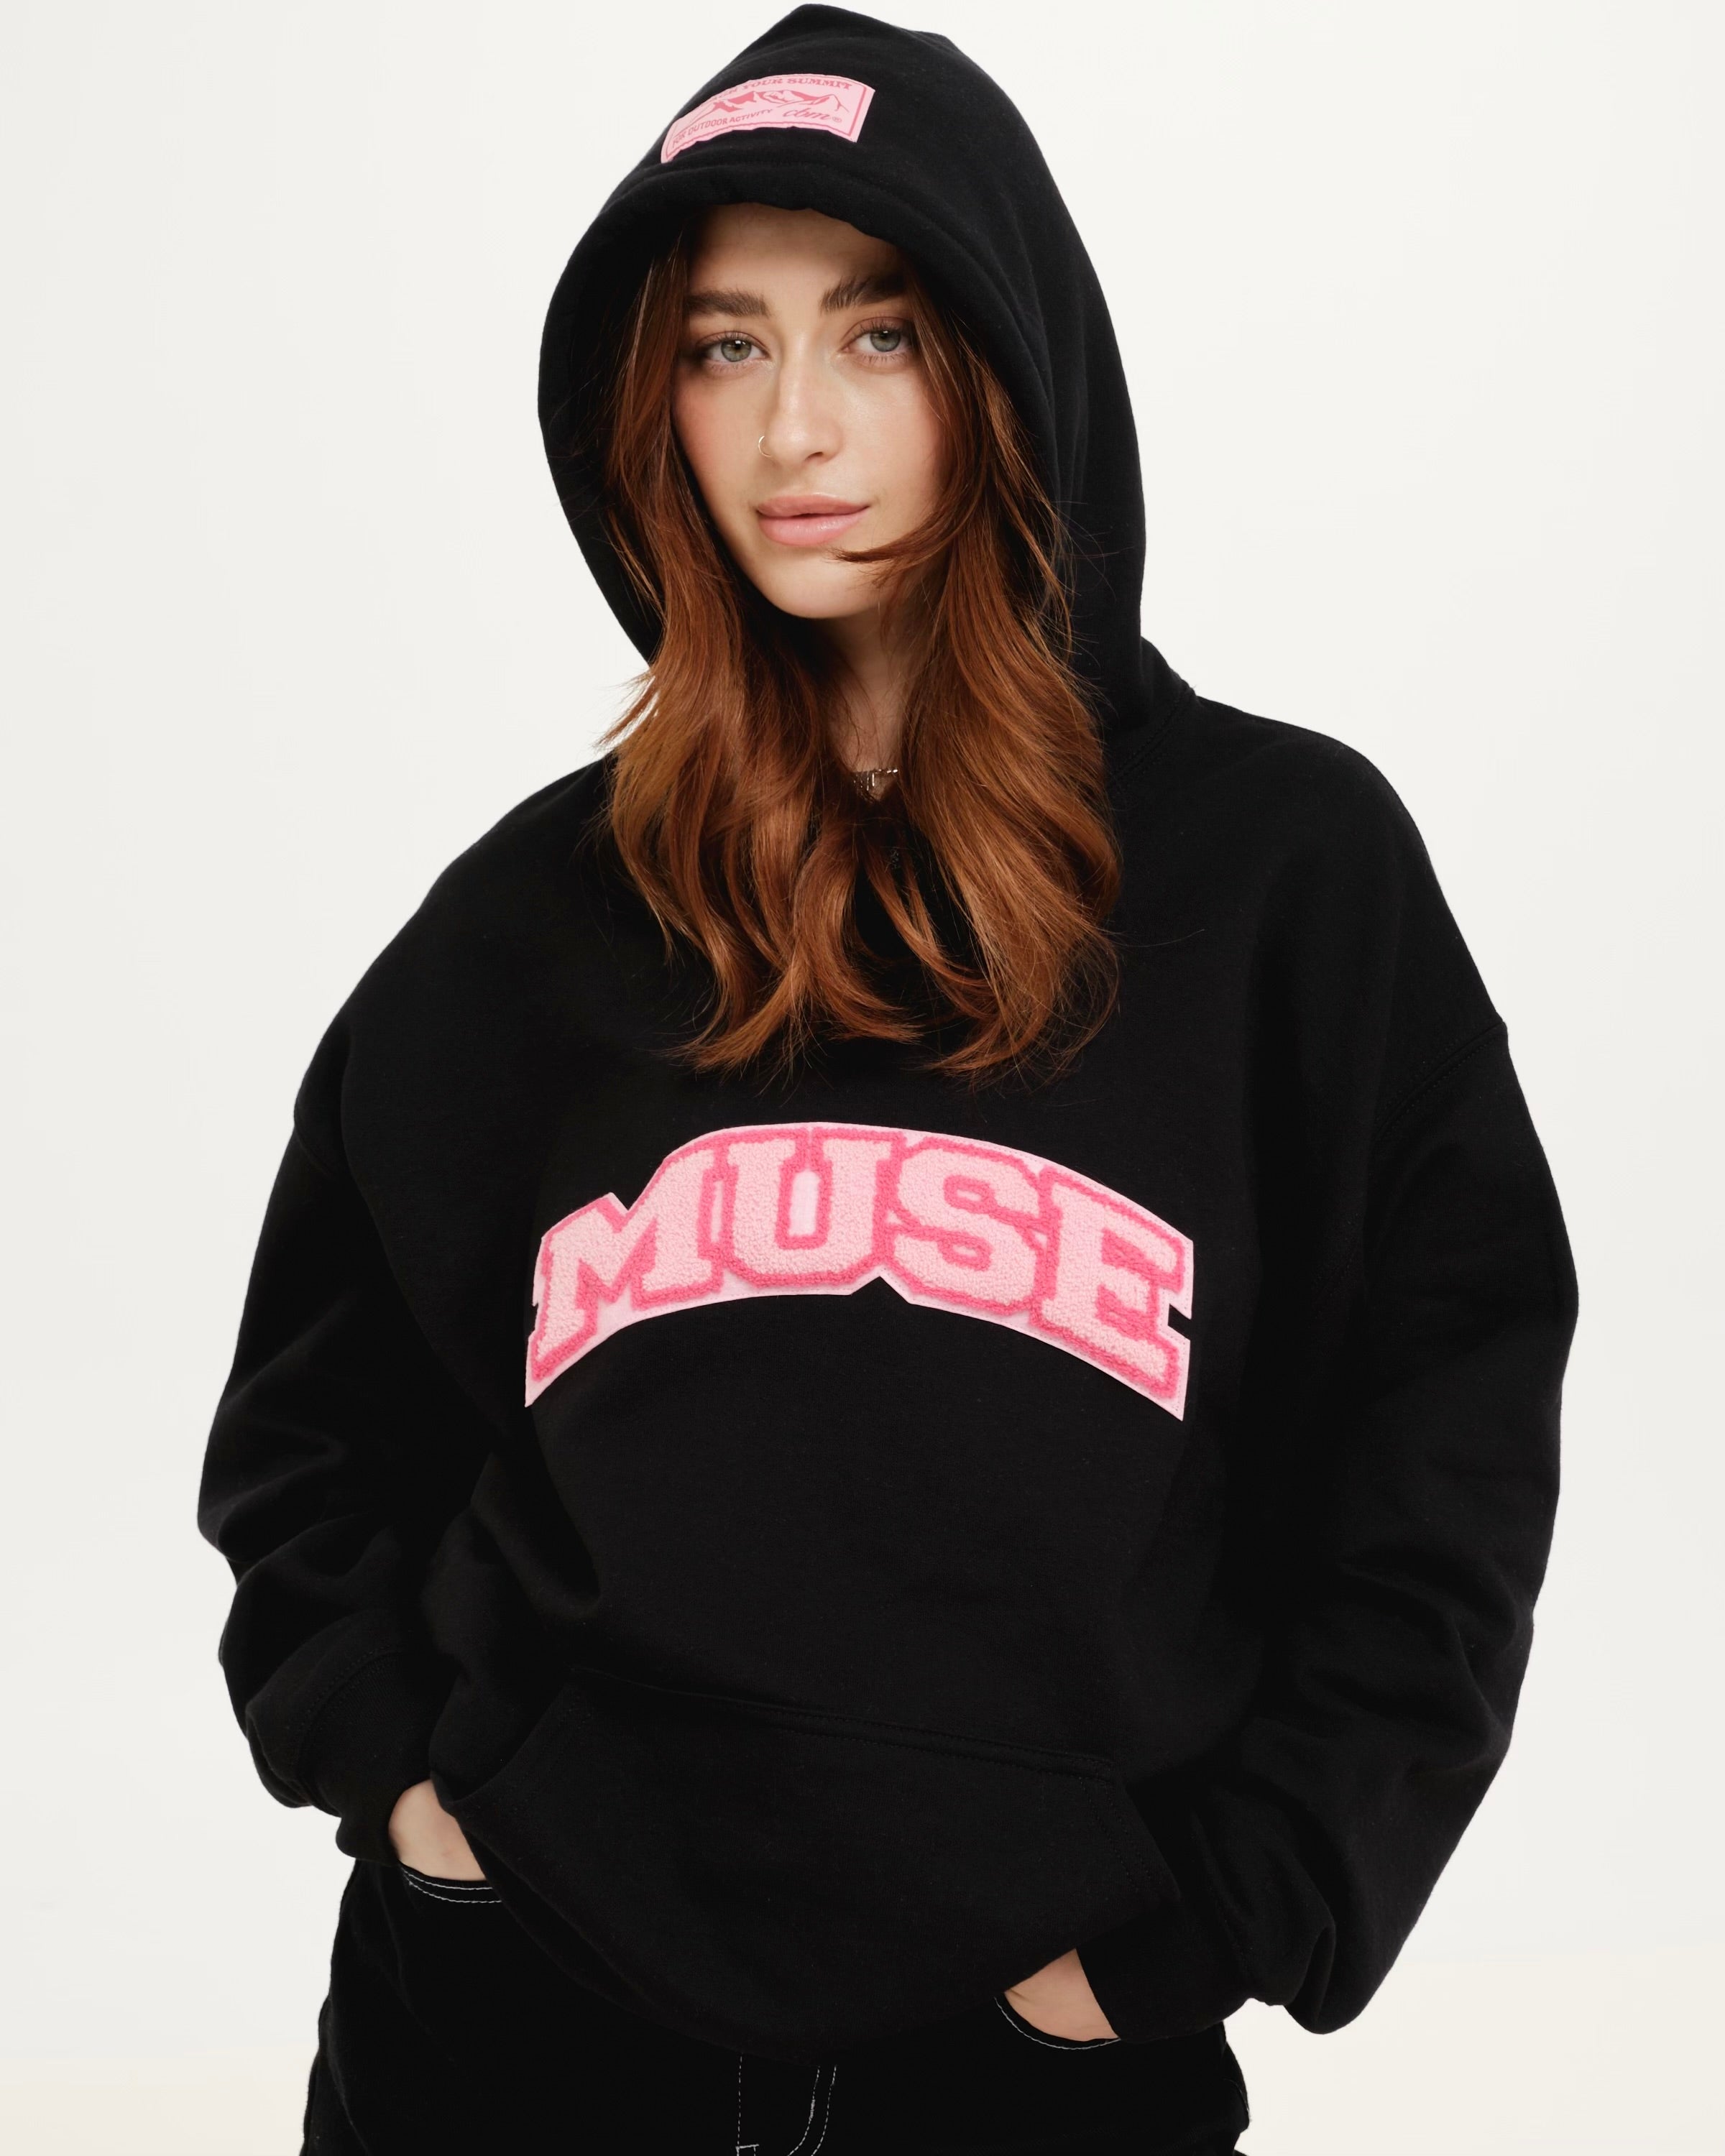 Muse Hoodie - Navy/White – Contrast Muse